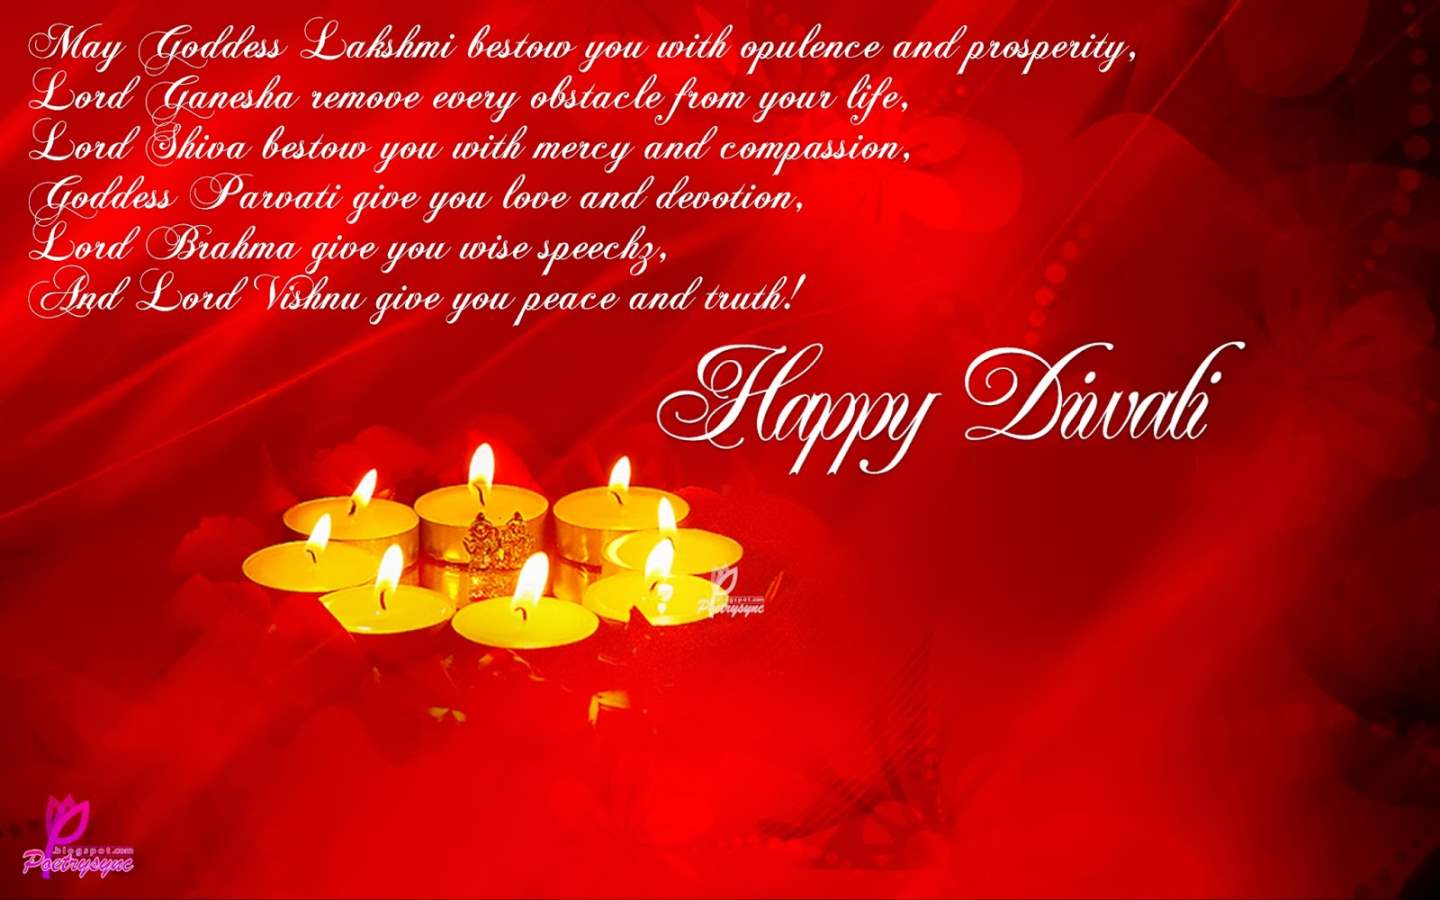 Happy Diwali 2015 Wallpapers English11 - High Resolution Diwali Greetings Wishes , HD Wallpaper & Backgrounds